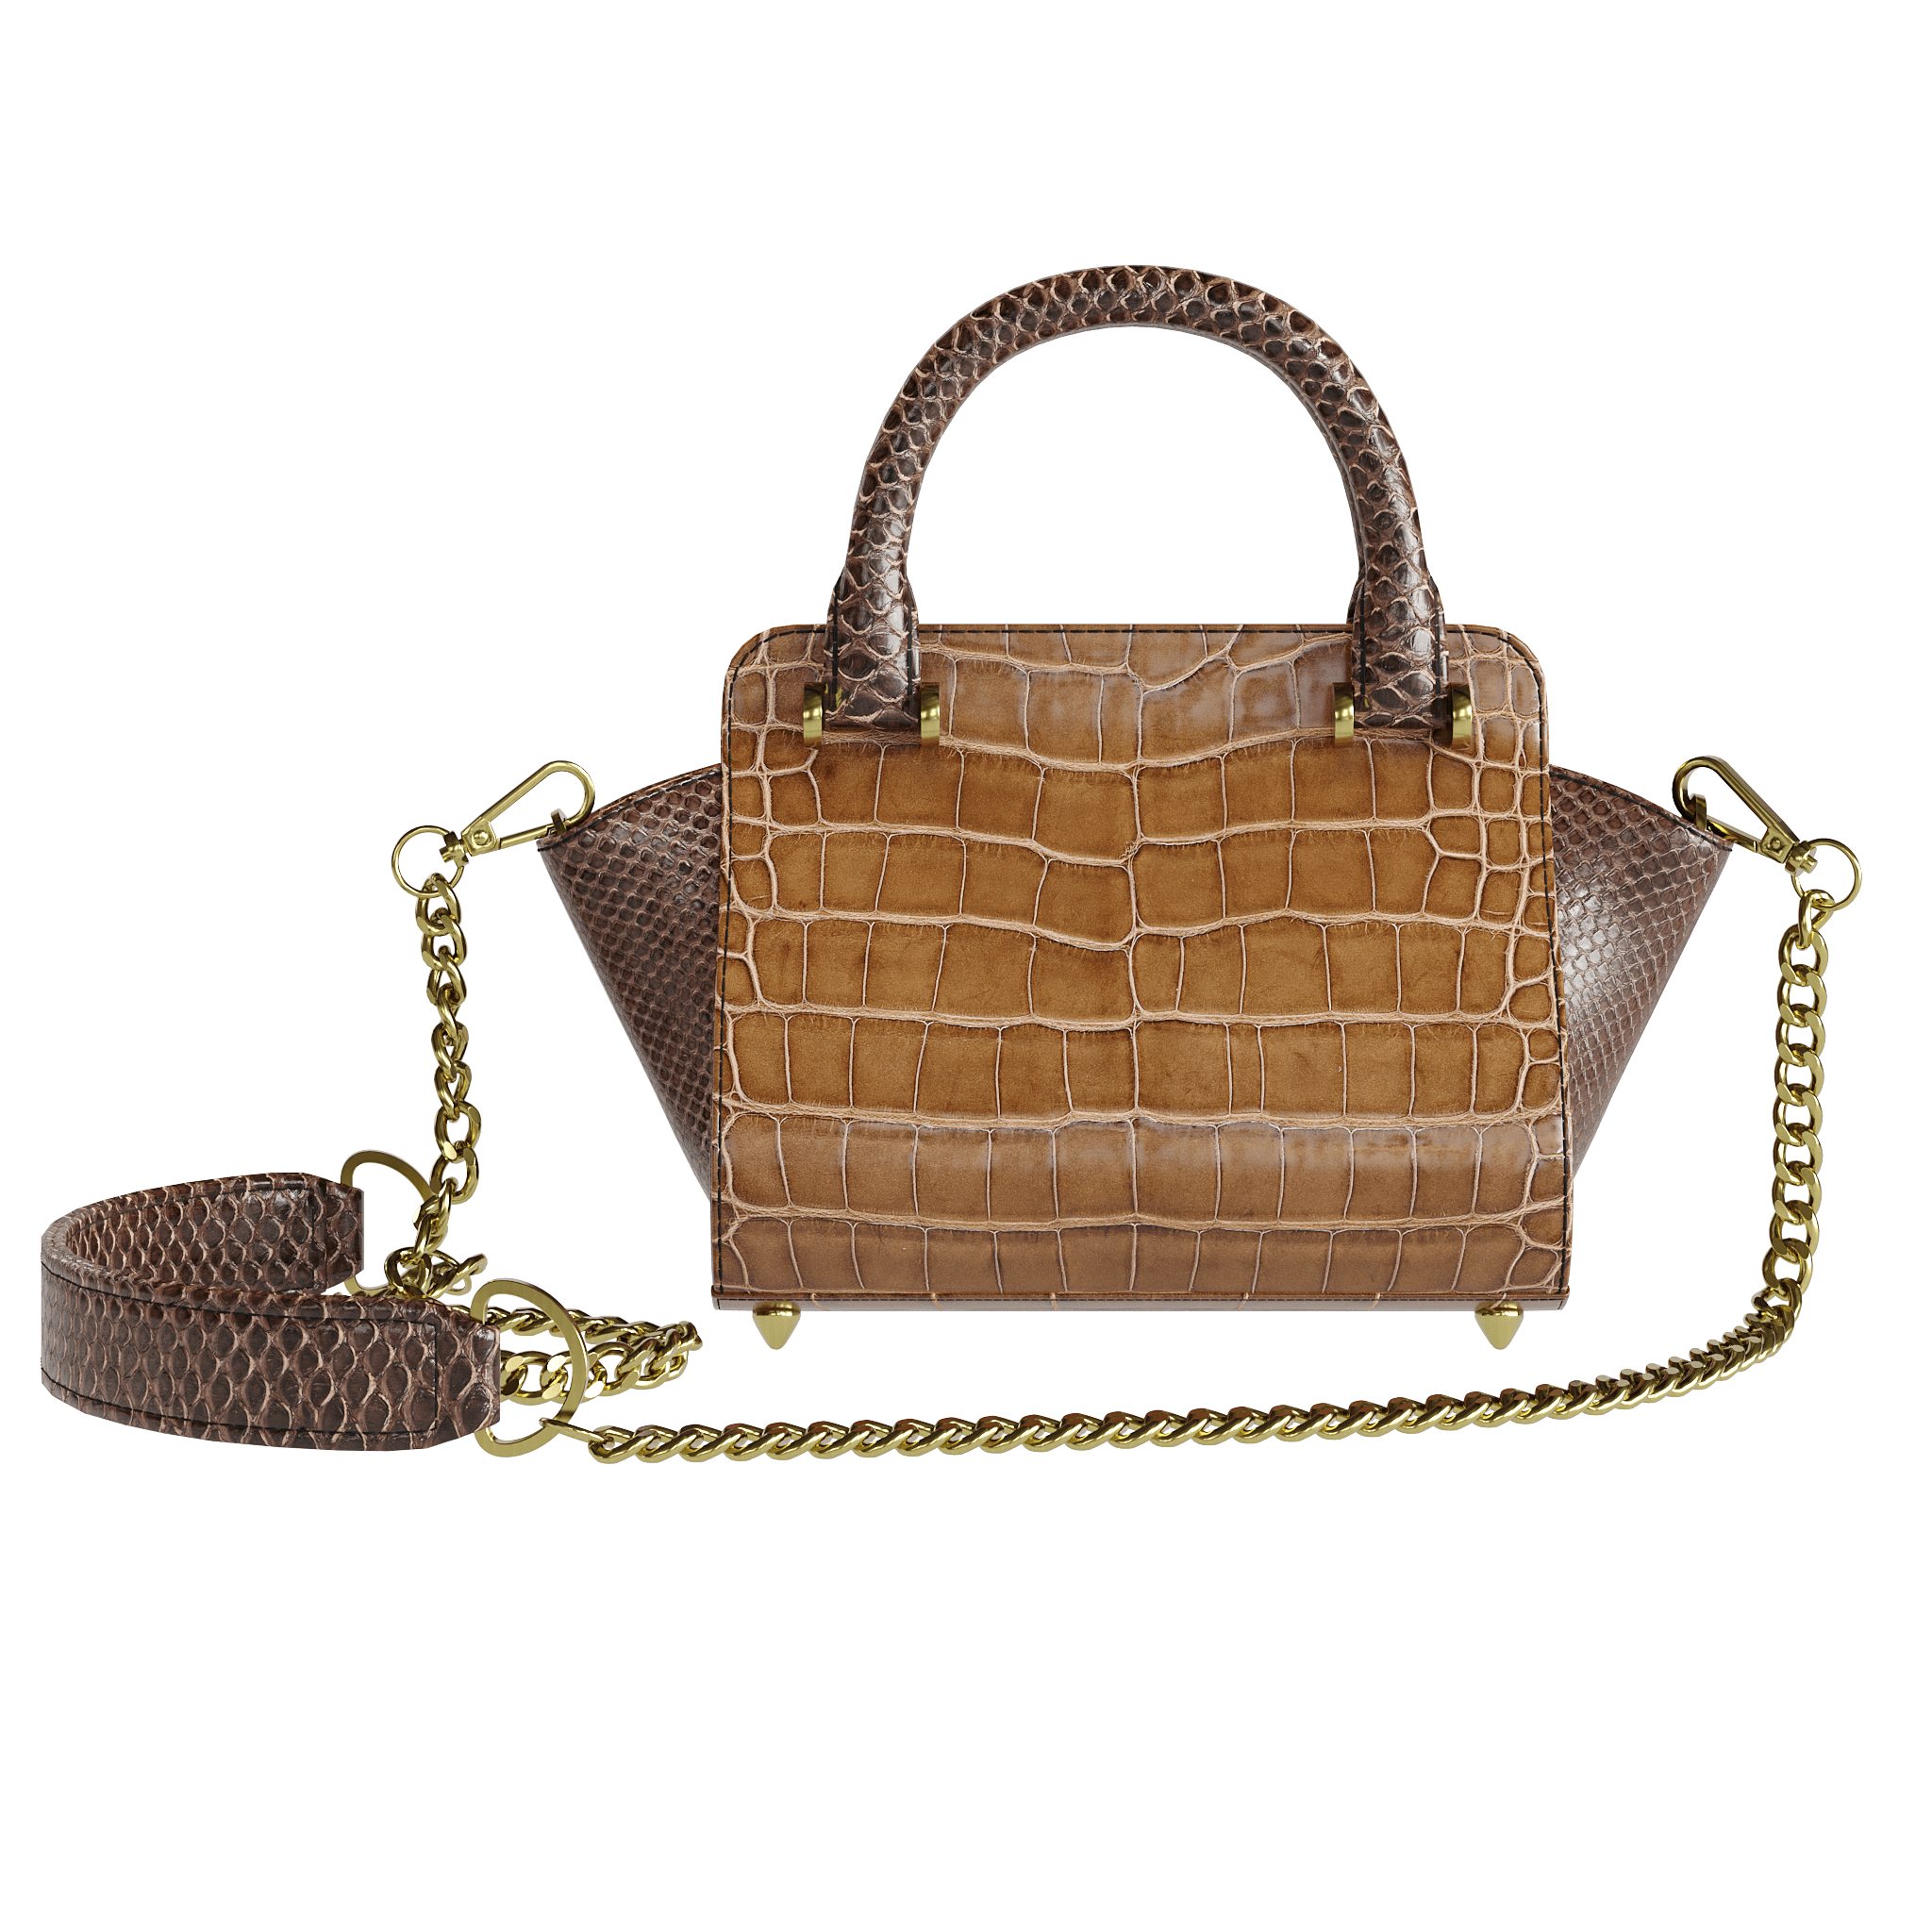 Authentic Brown Alligator Handbag With Fine Python Scale Accents